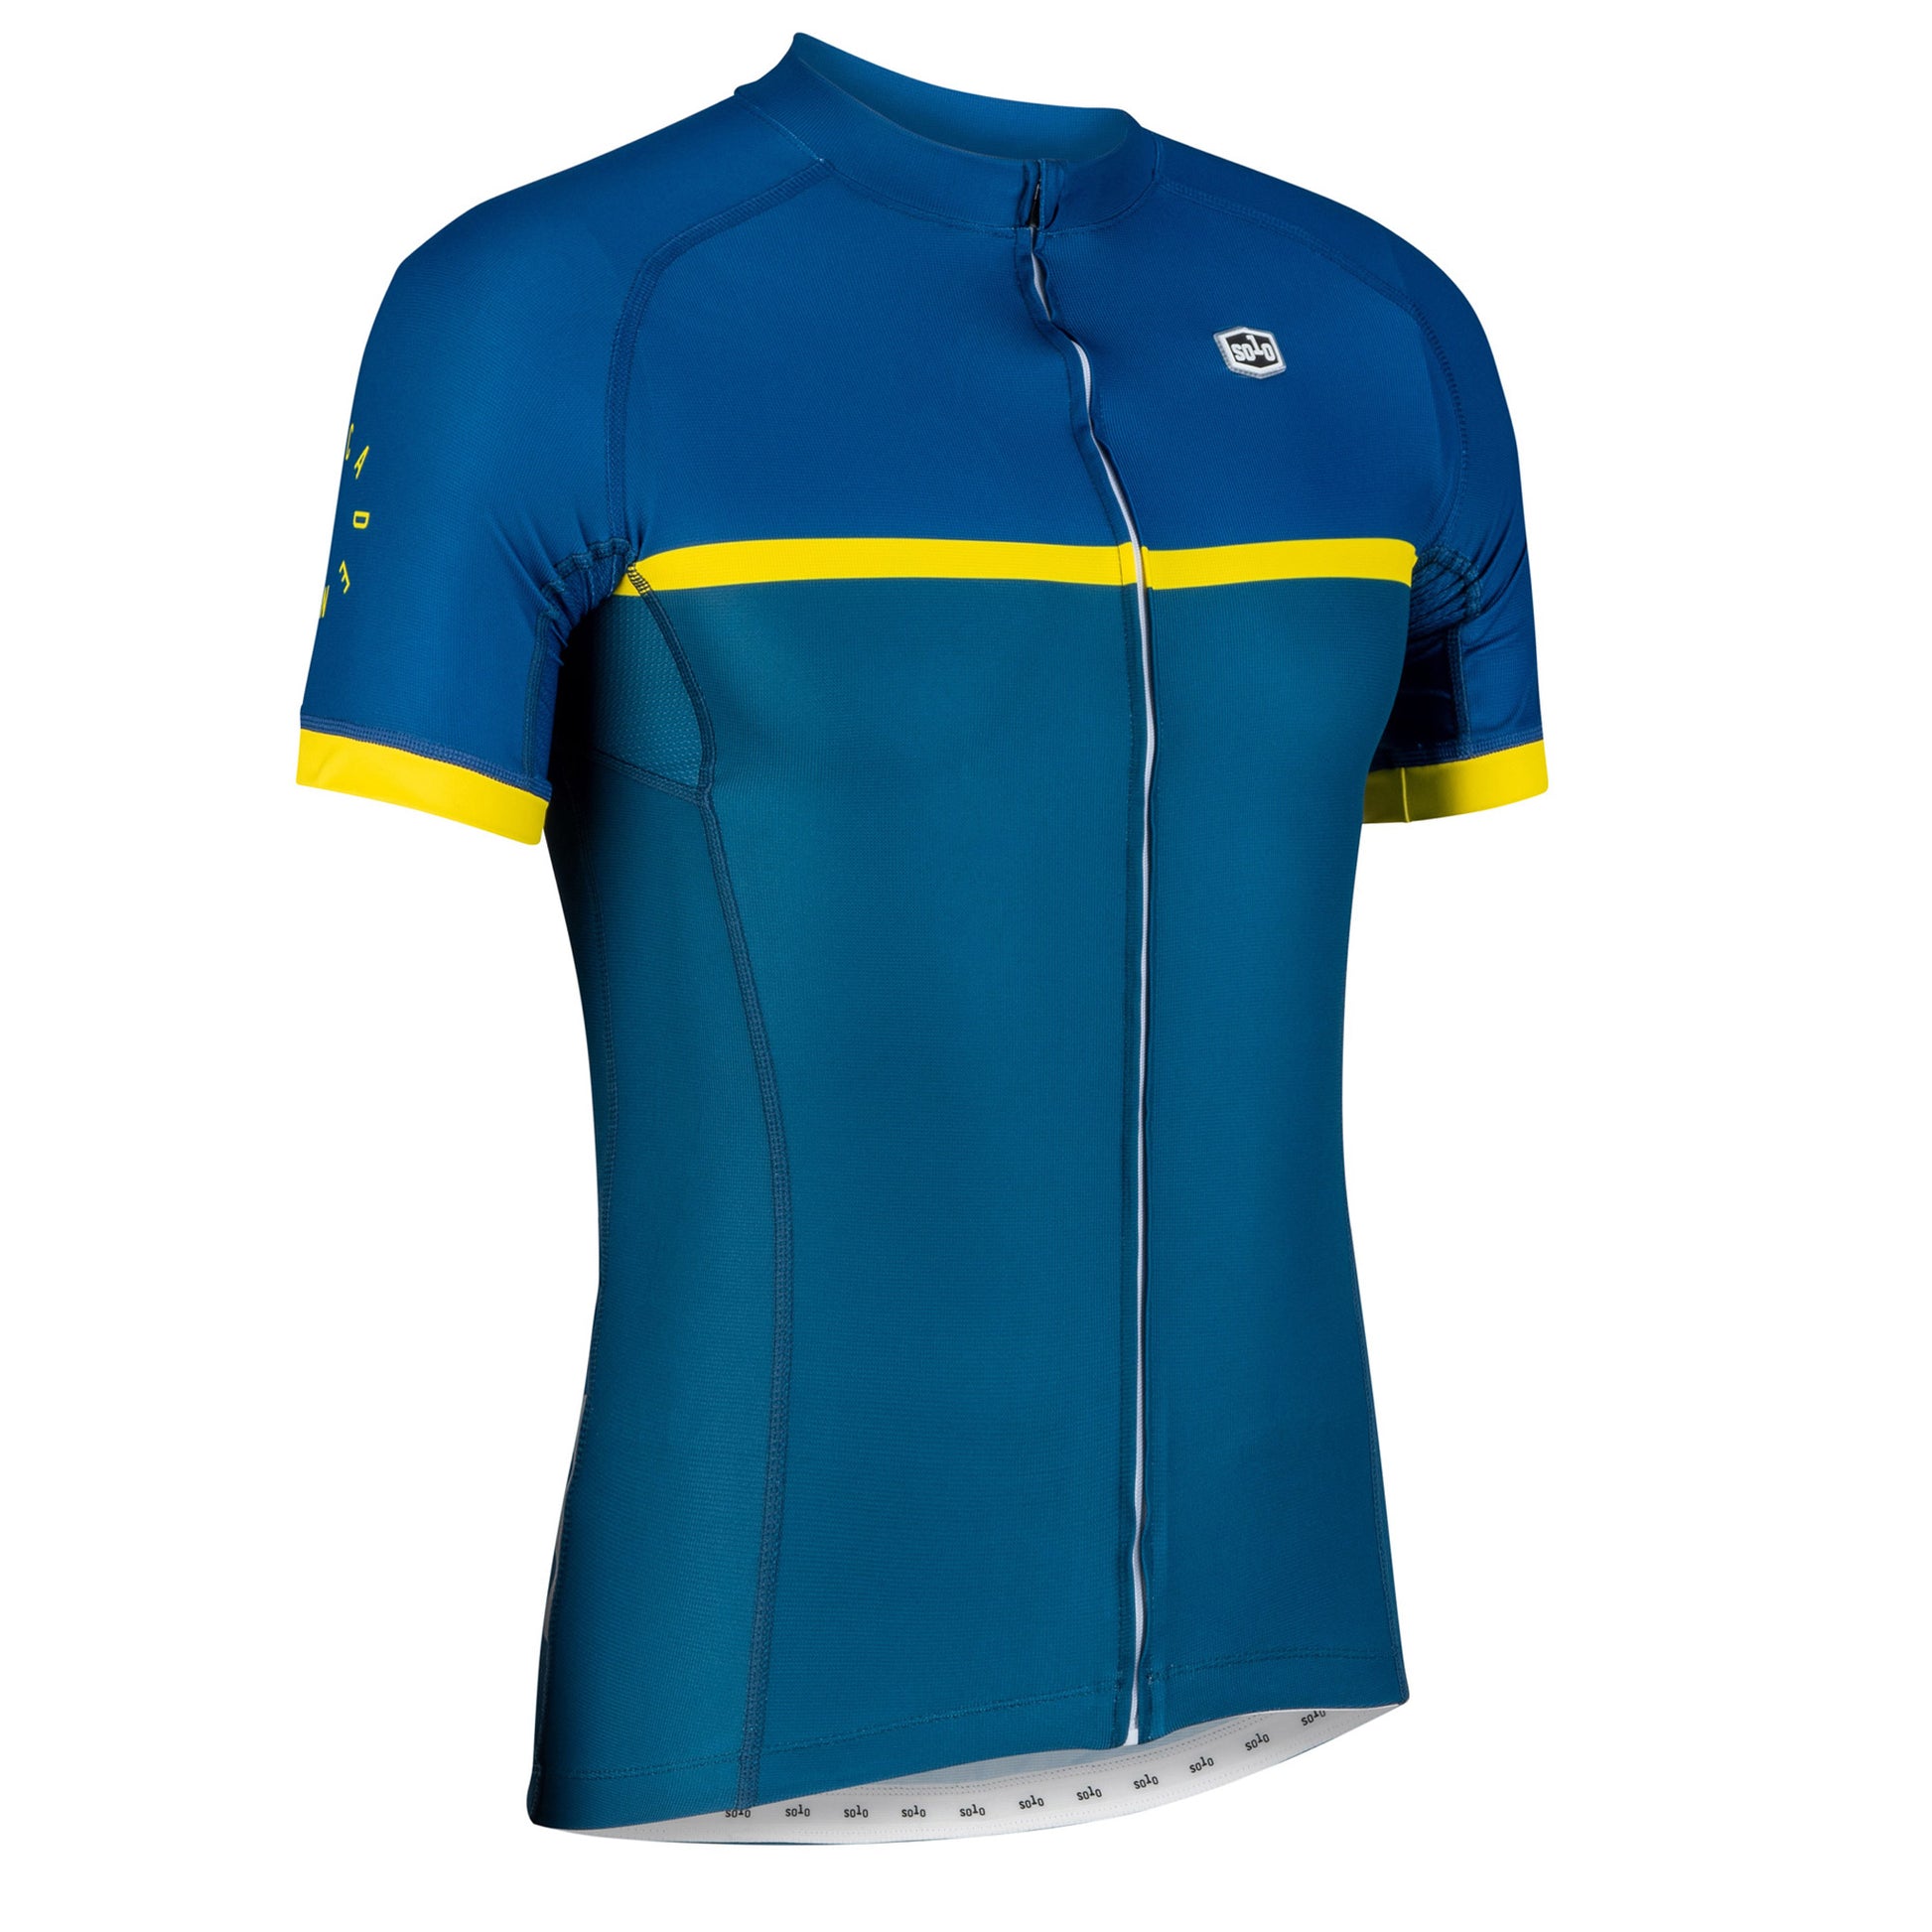 Solo Mens Cadence Jersey, Blue/Fluro Yellow, buy online at Woolys Wheels with free delivery